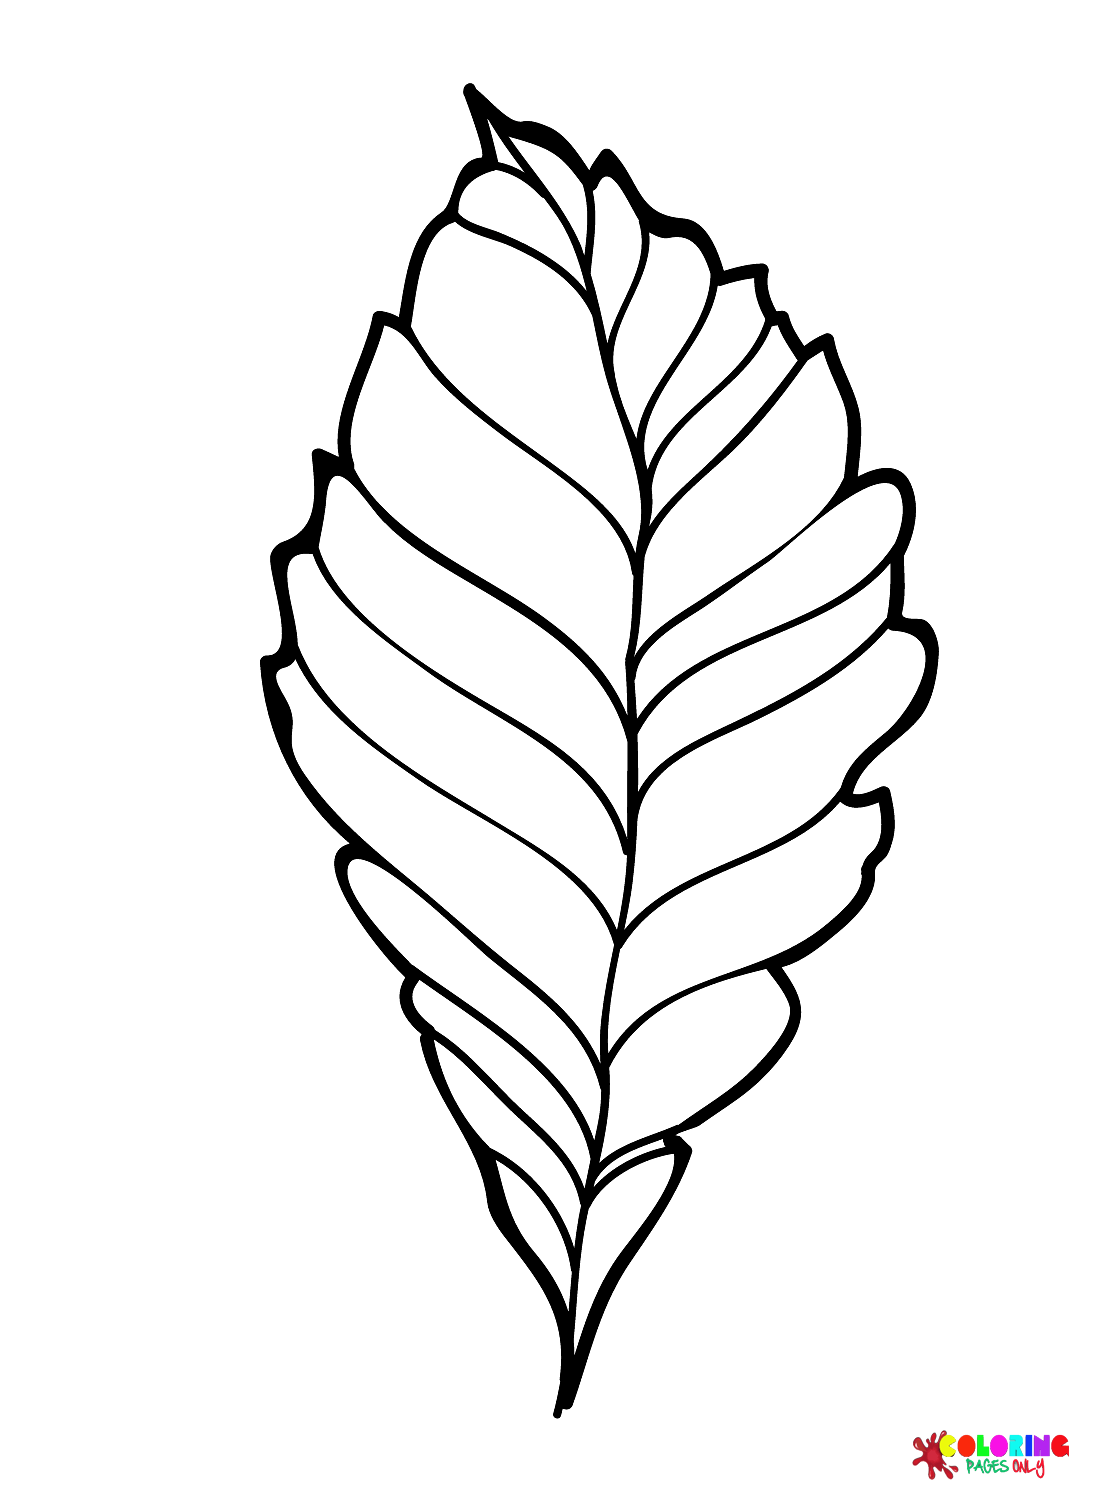 Chestnut Leaf from Leaves